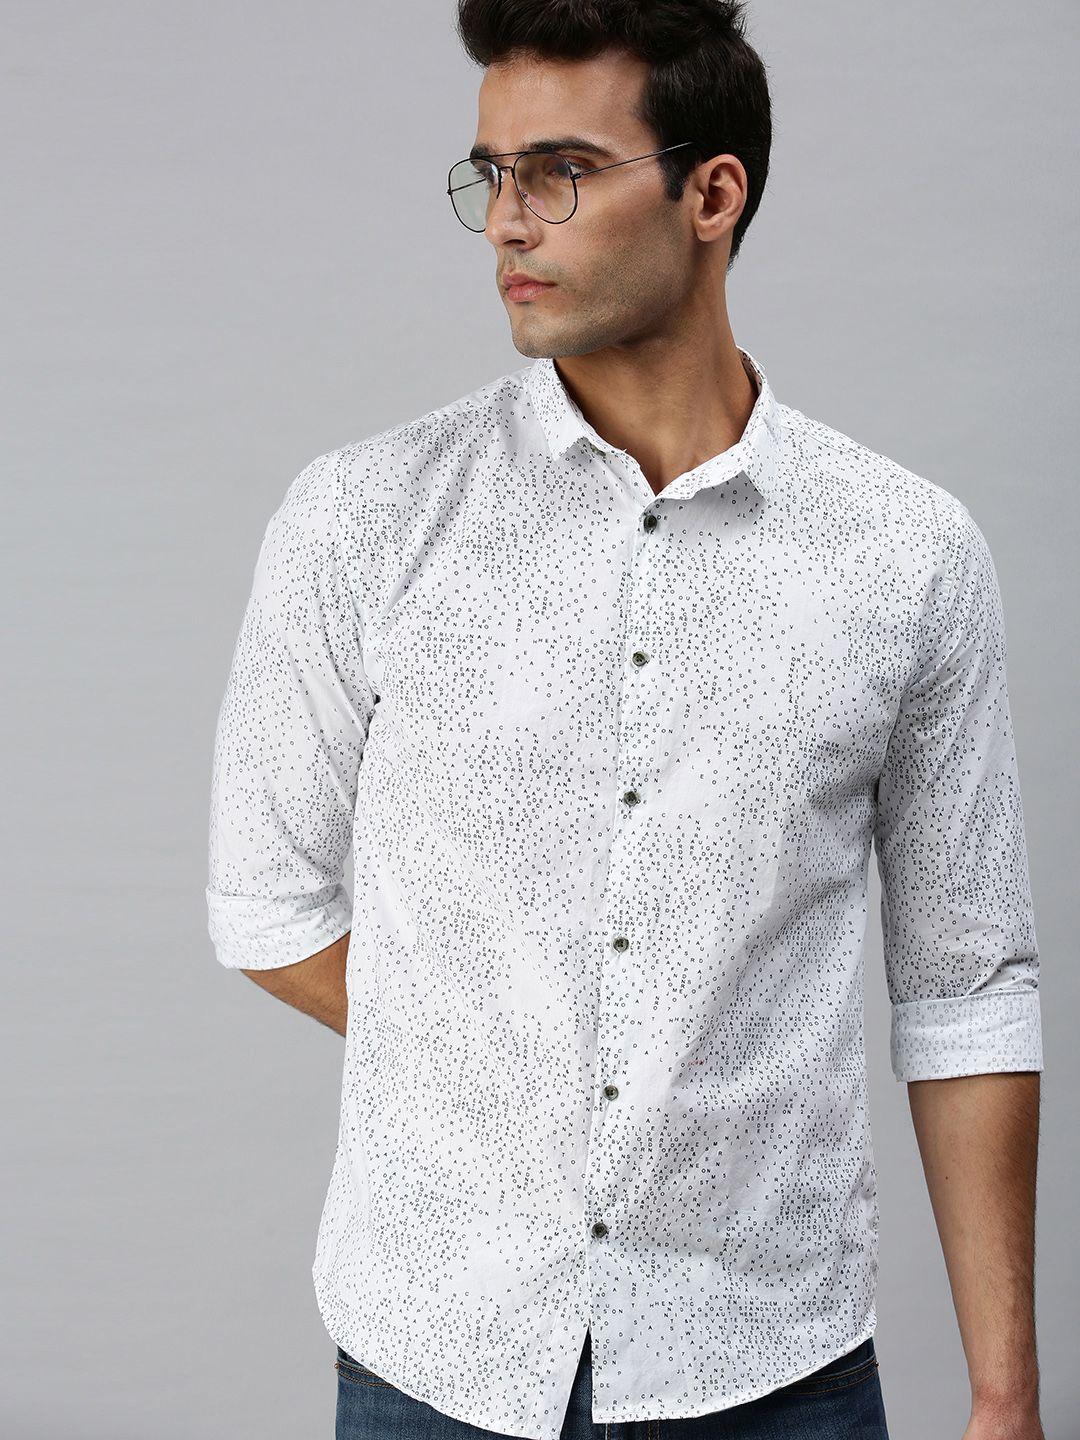 showoff-men-white-&-black-classic-slim-fit-ditsy-printed-cotton-casual-shirt